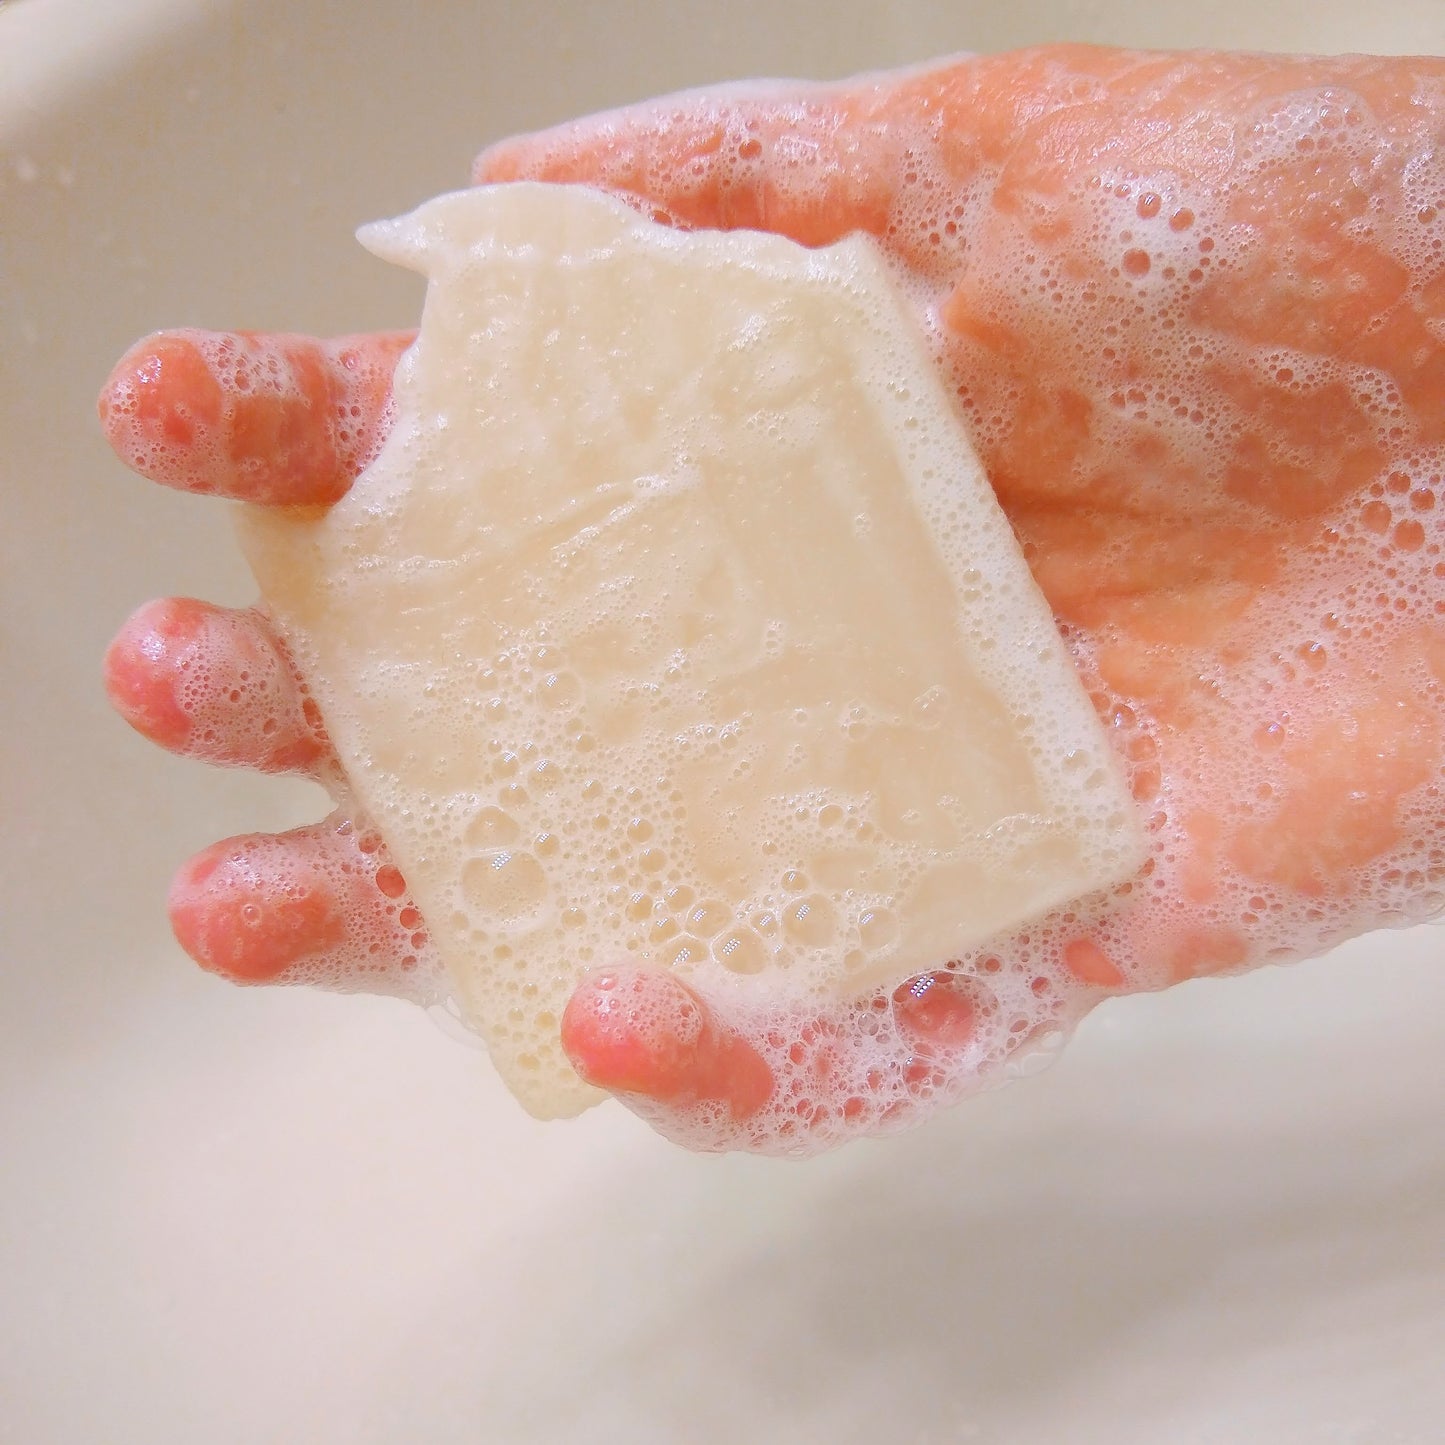 A hand cover with suds or bubbles holding a lathered bar of soap.